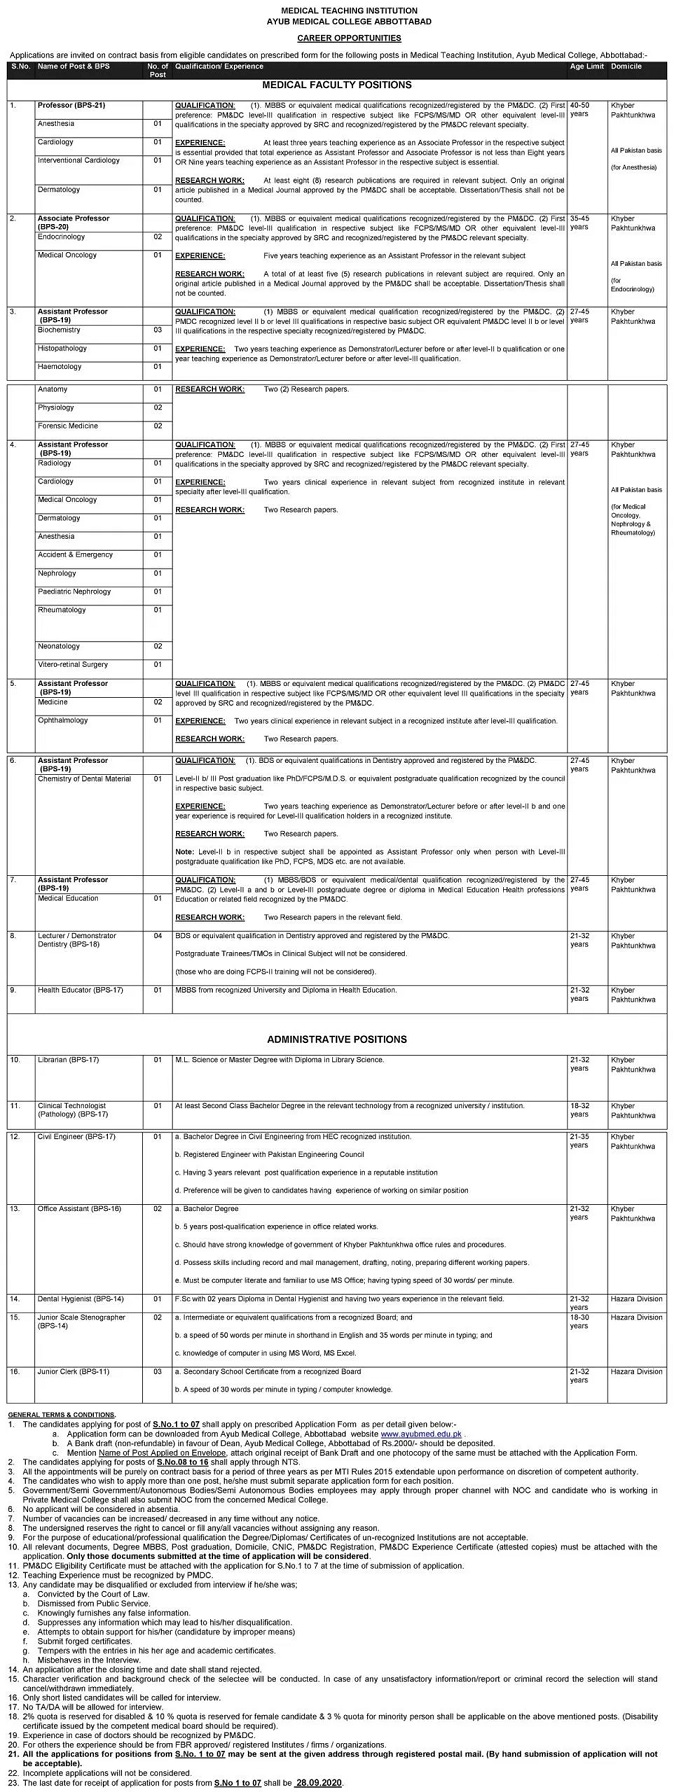 Medical Teaching Institution Medical Administrative Jobs NTS Roll No Slip